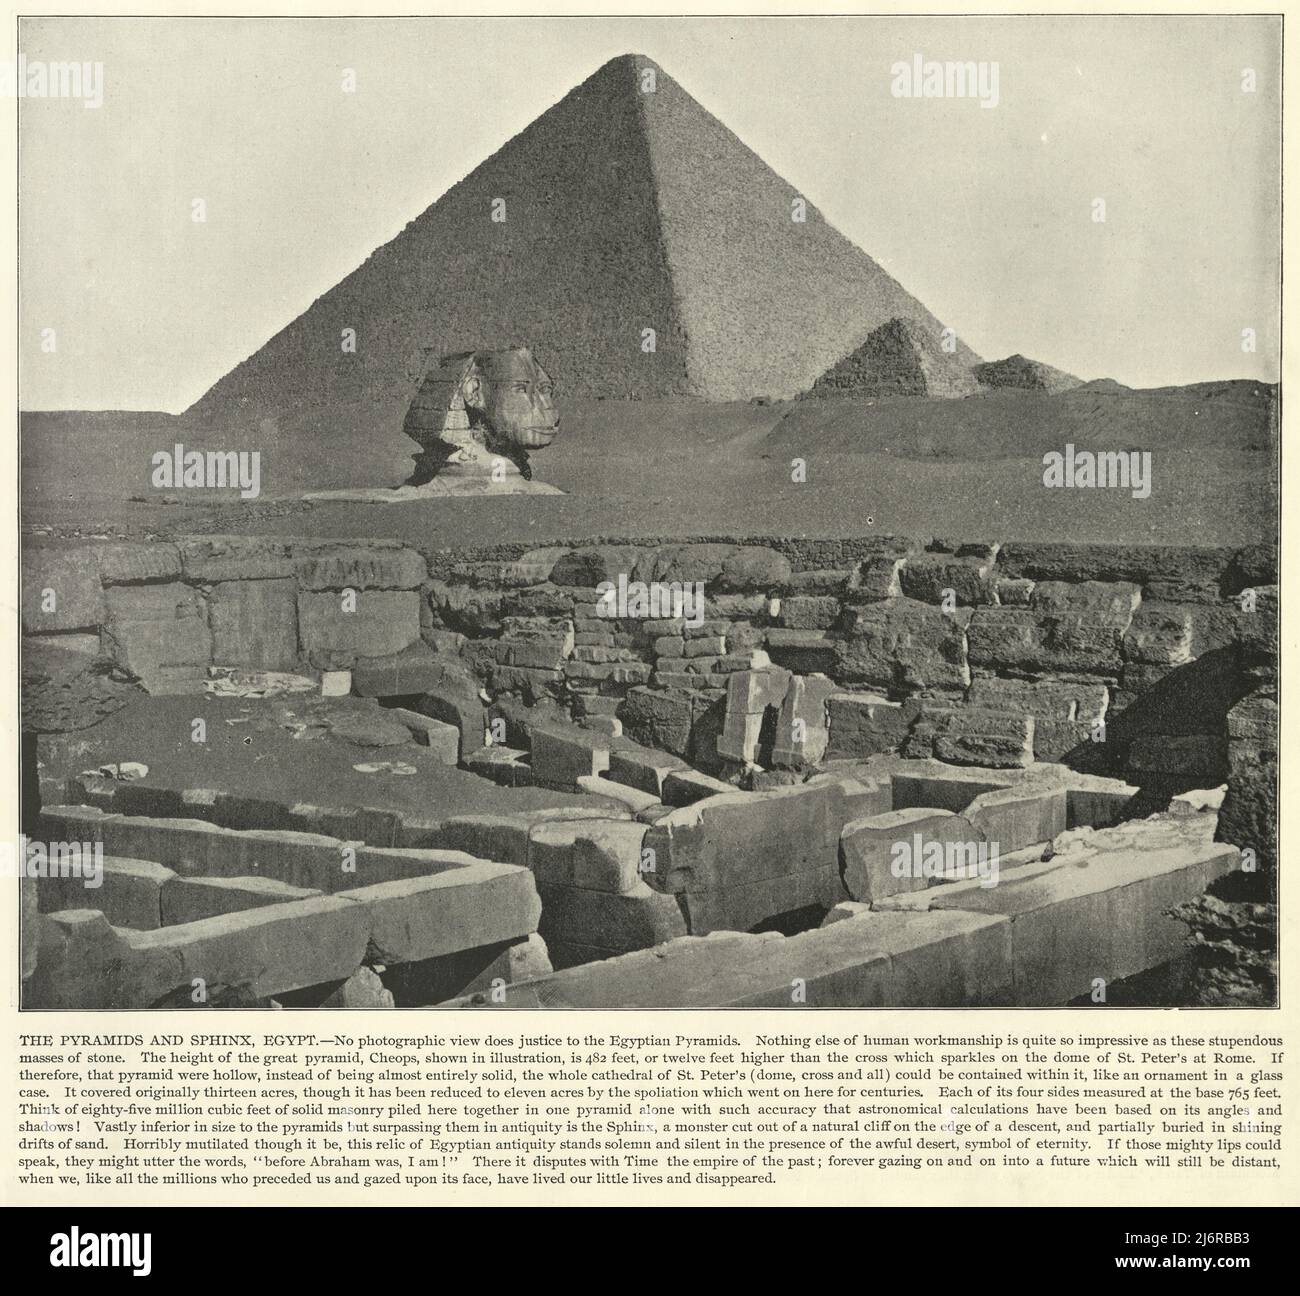 Antique photograph of Pyramids and sphinx, Egypt, 19th Century Stock Photo